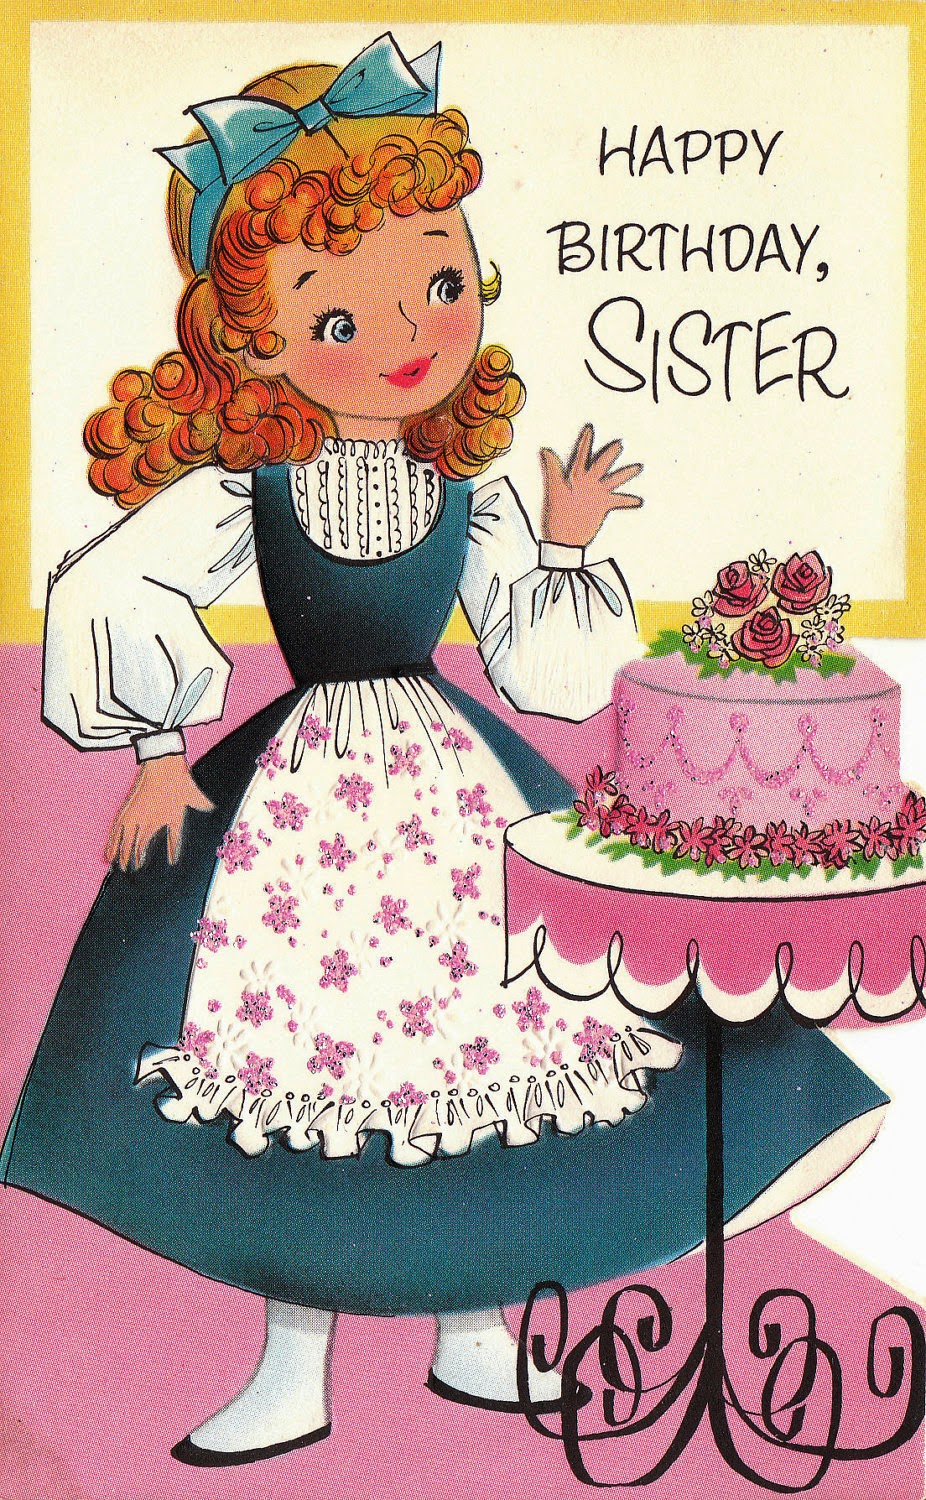 view-sister-birthday-cards-images